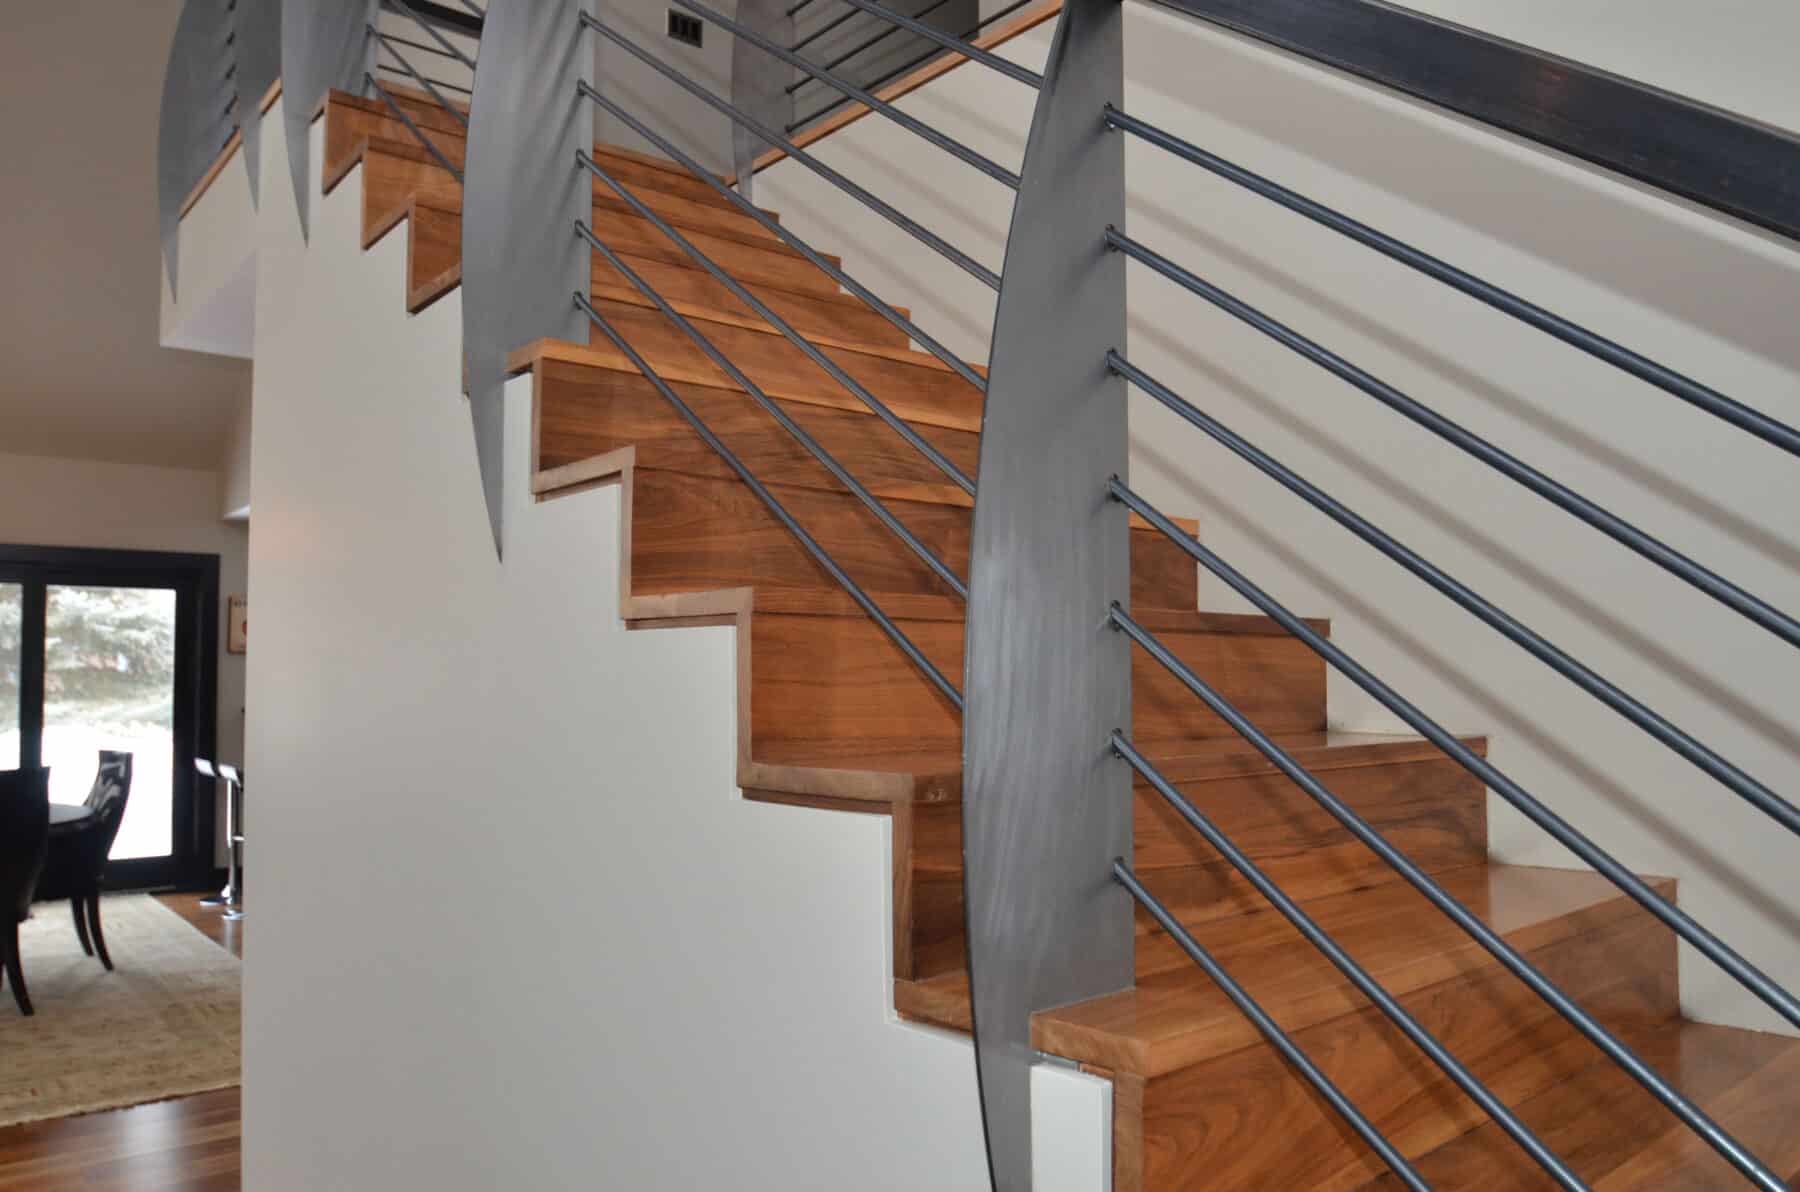 Custom Fabrication of Architectural Steel Metal Stair Railing Construction Specialty Projects by Commercial Builder & General Contractor Structural Enterprises